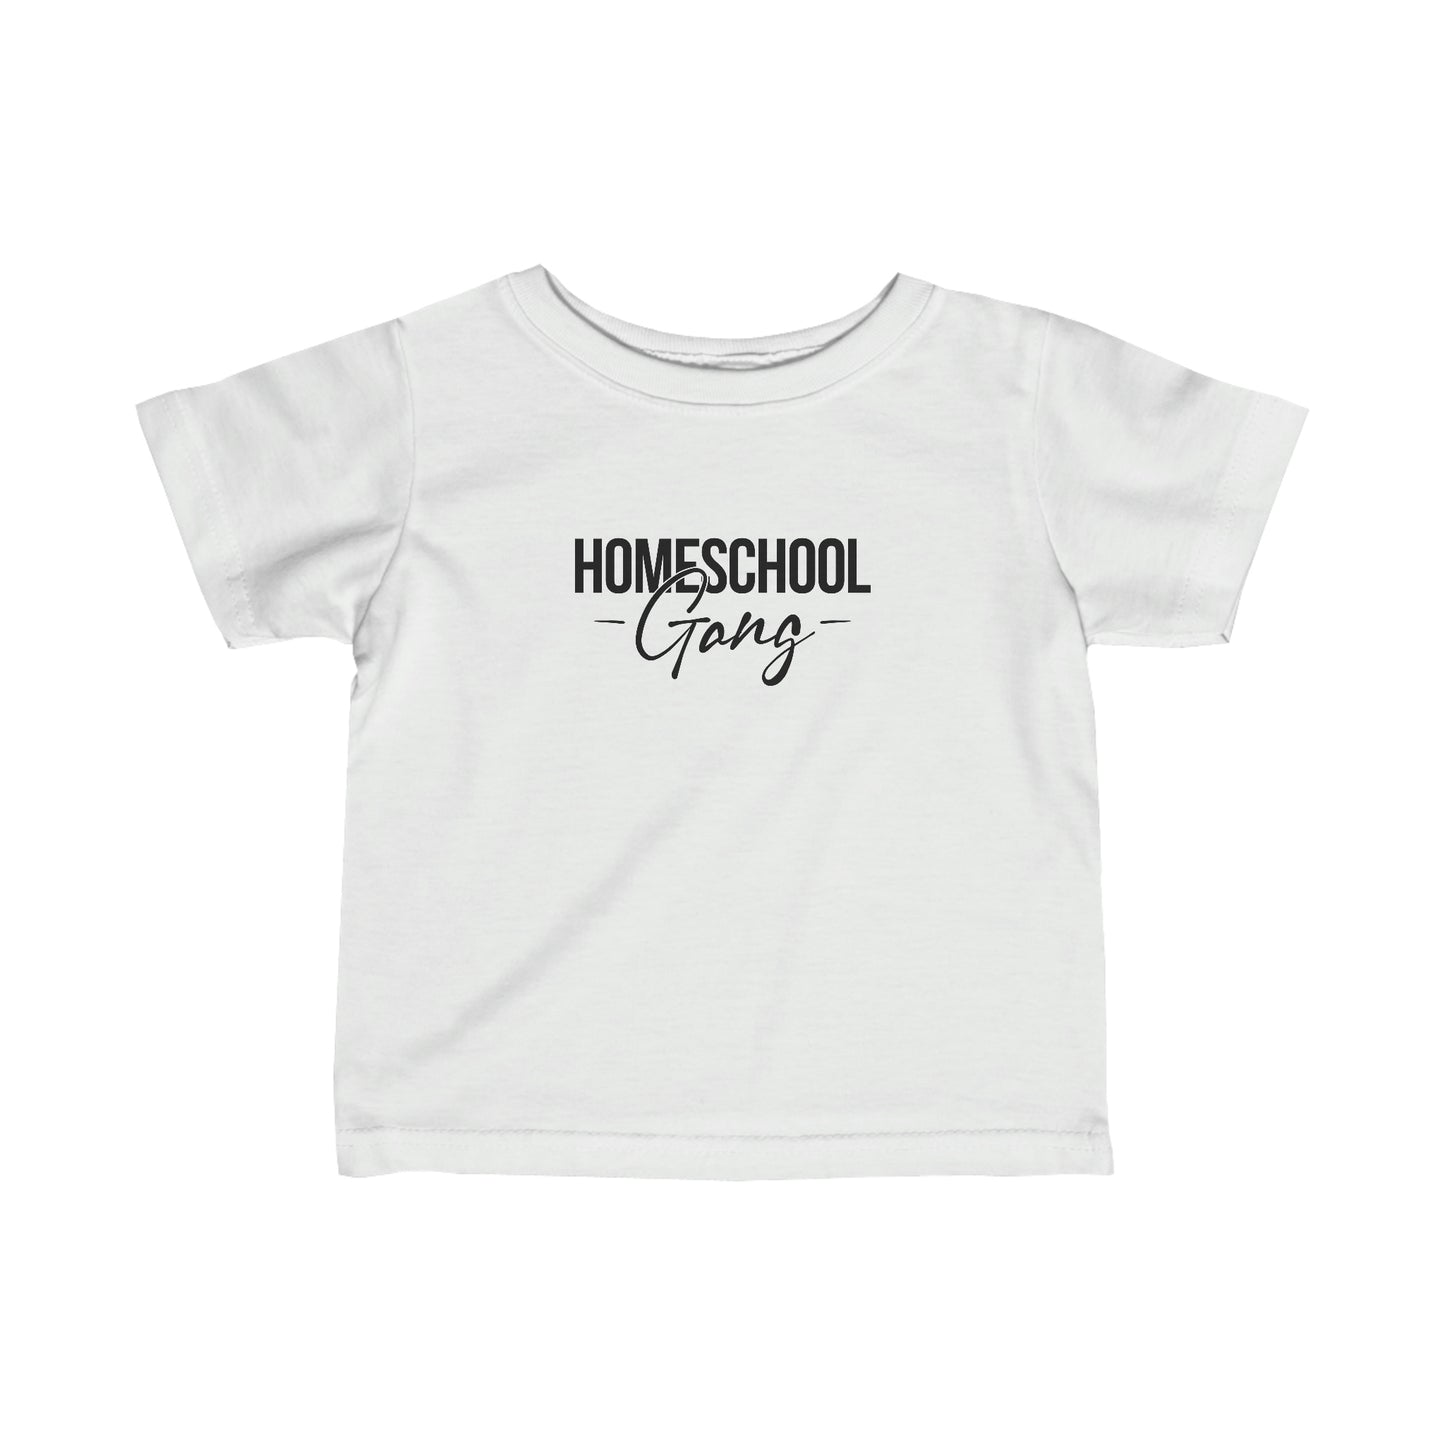 Detailed view of the soft, ringspun cotton fabric of the Homeschool Gang Toddler Tee.